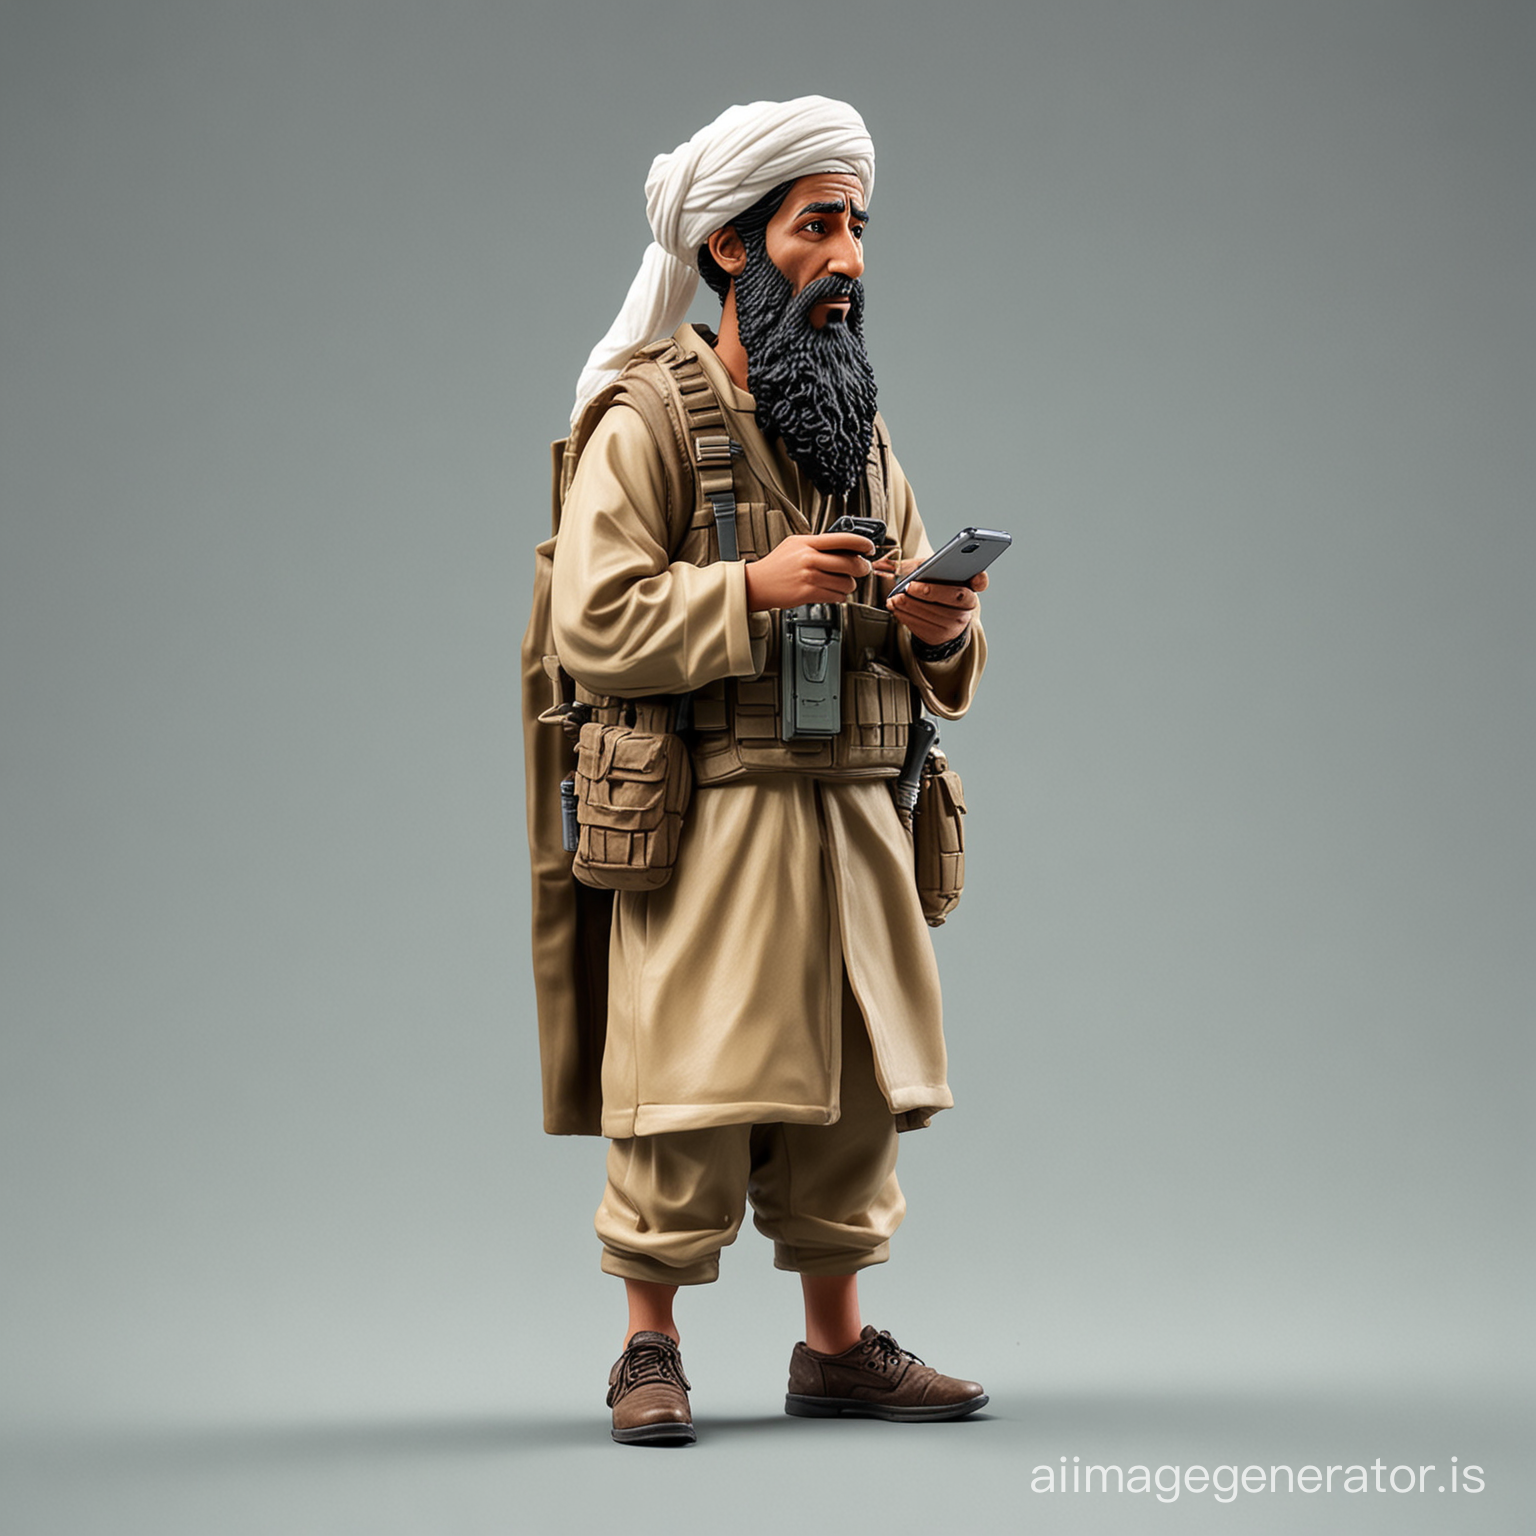 Miniature bin laden, taliban, kid, toy, full body, side profile, he is staring at his phone, isolated